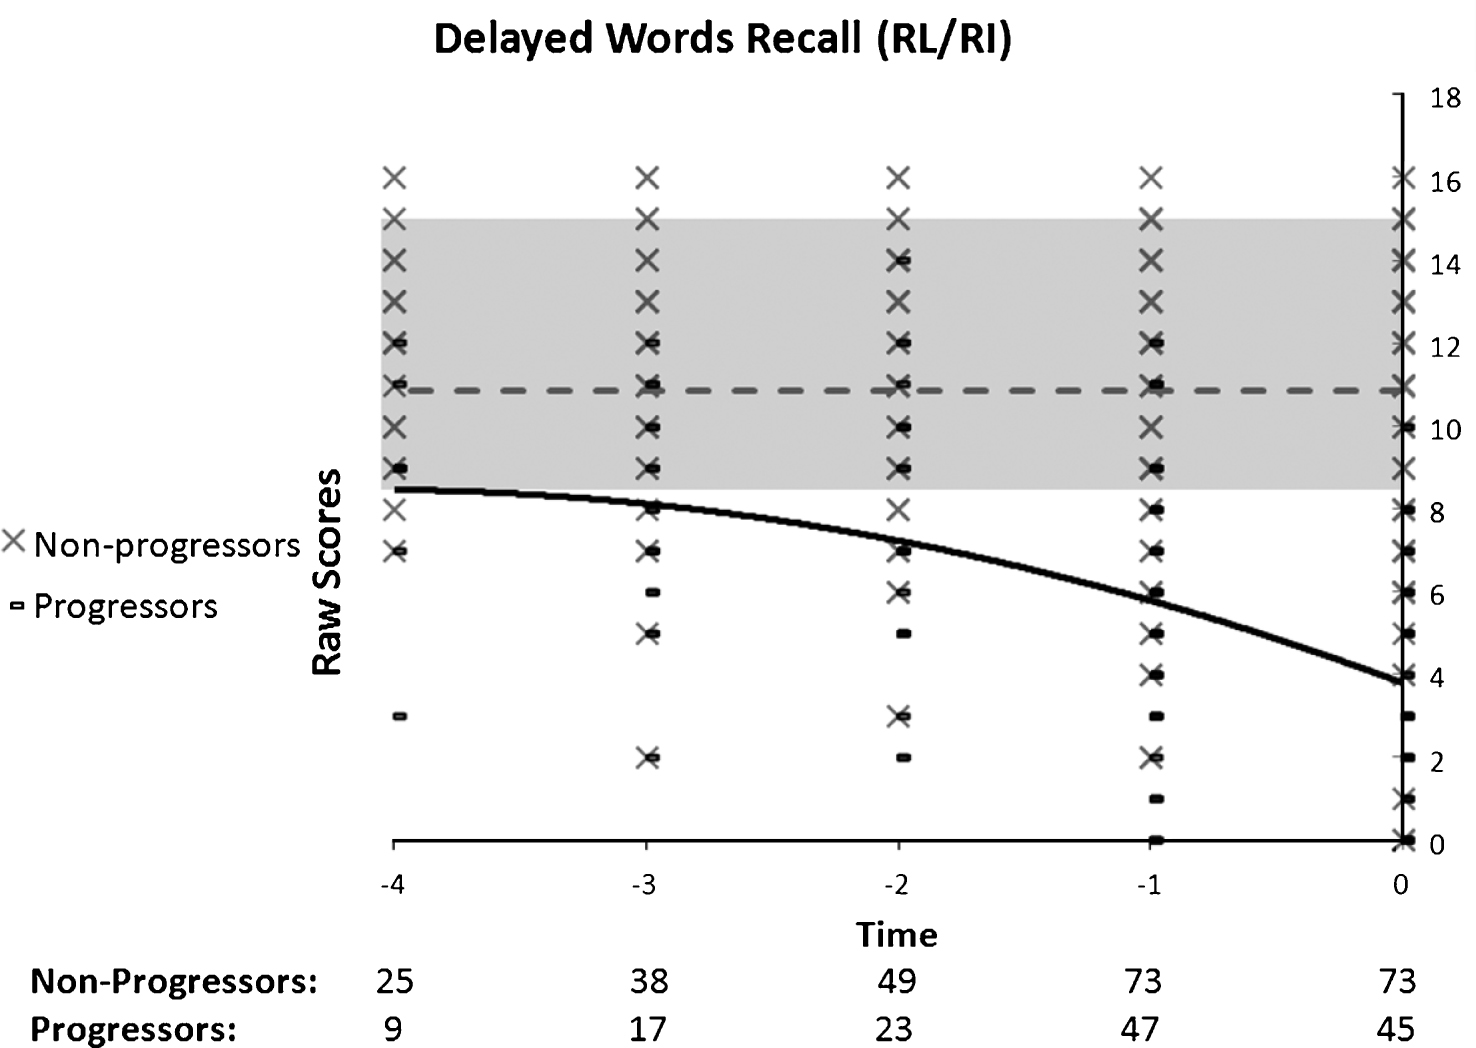 Performance on the RL/RI’s Delayed Words as a function of time to diagnosis (for progressors) or on the last 5 cognitive assessments (for non-progressors). A quadratic function best describes the distribution for the progressors: black line. No significant model is found in the non-progressors: dotted grey line.